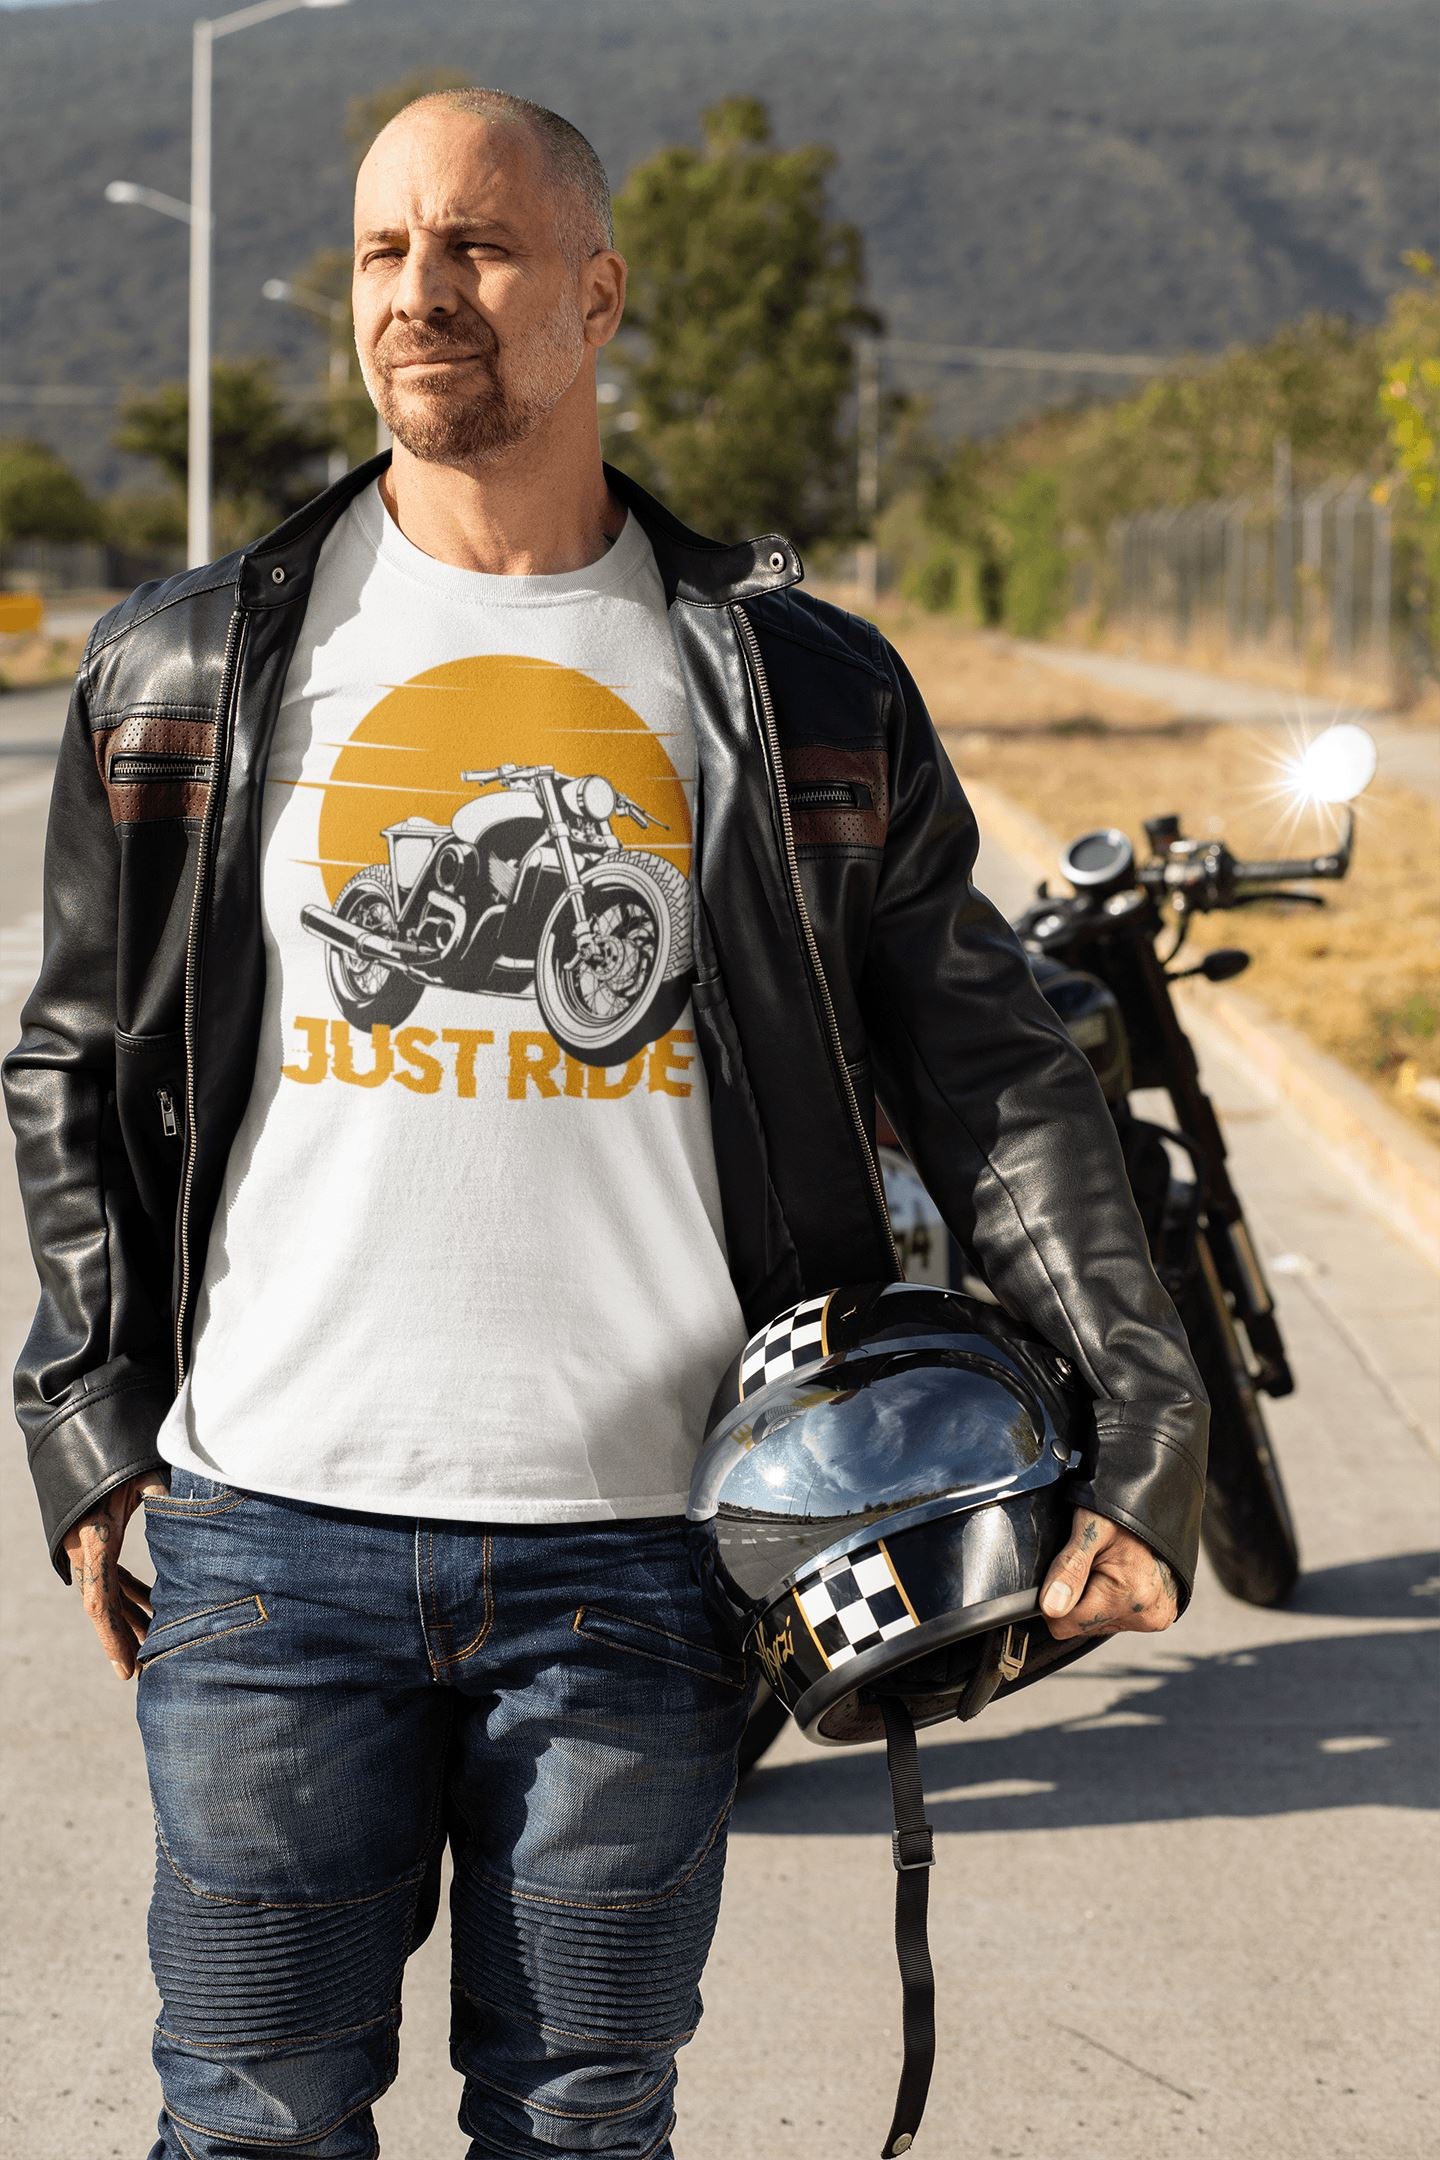 Just Ride Exclusive Bike T Shirt for Men and Women Motorcycle Enthusiasts - Catch My Drift India  bike, black, clothing, cycling, general, gym, made in india, riding, shirt, t shirt, trending